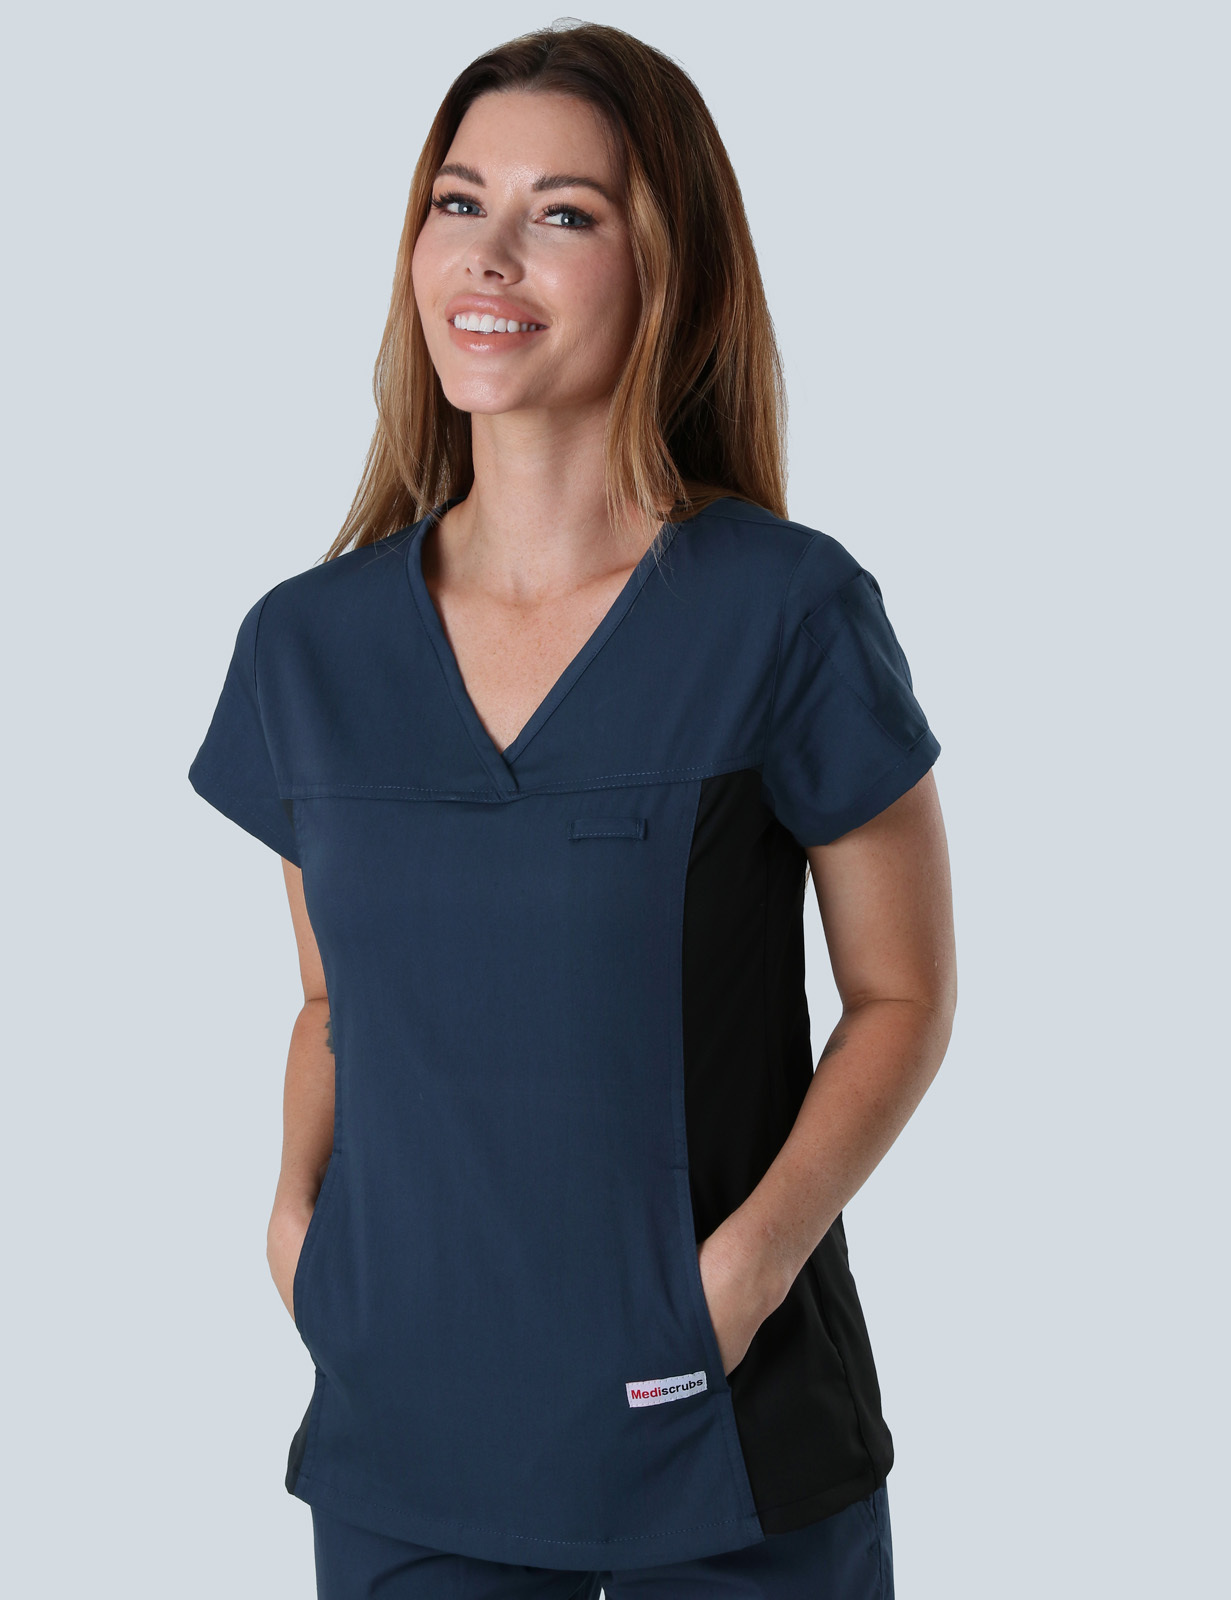 Gladstone Hospital - Medical Surgical (Women's Fit Spandex Scrub Top and Cargo Pants in Navy incl Logos)